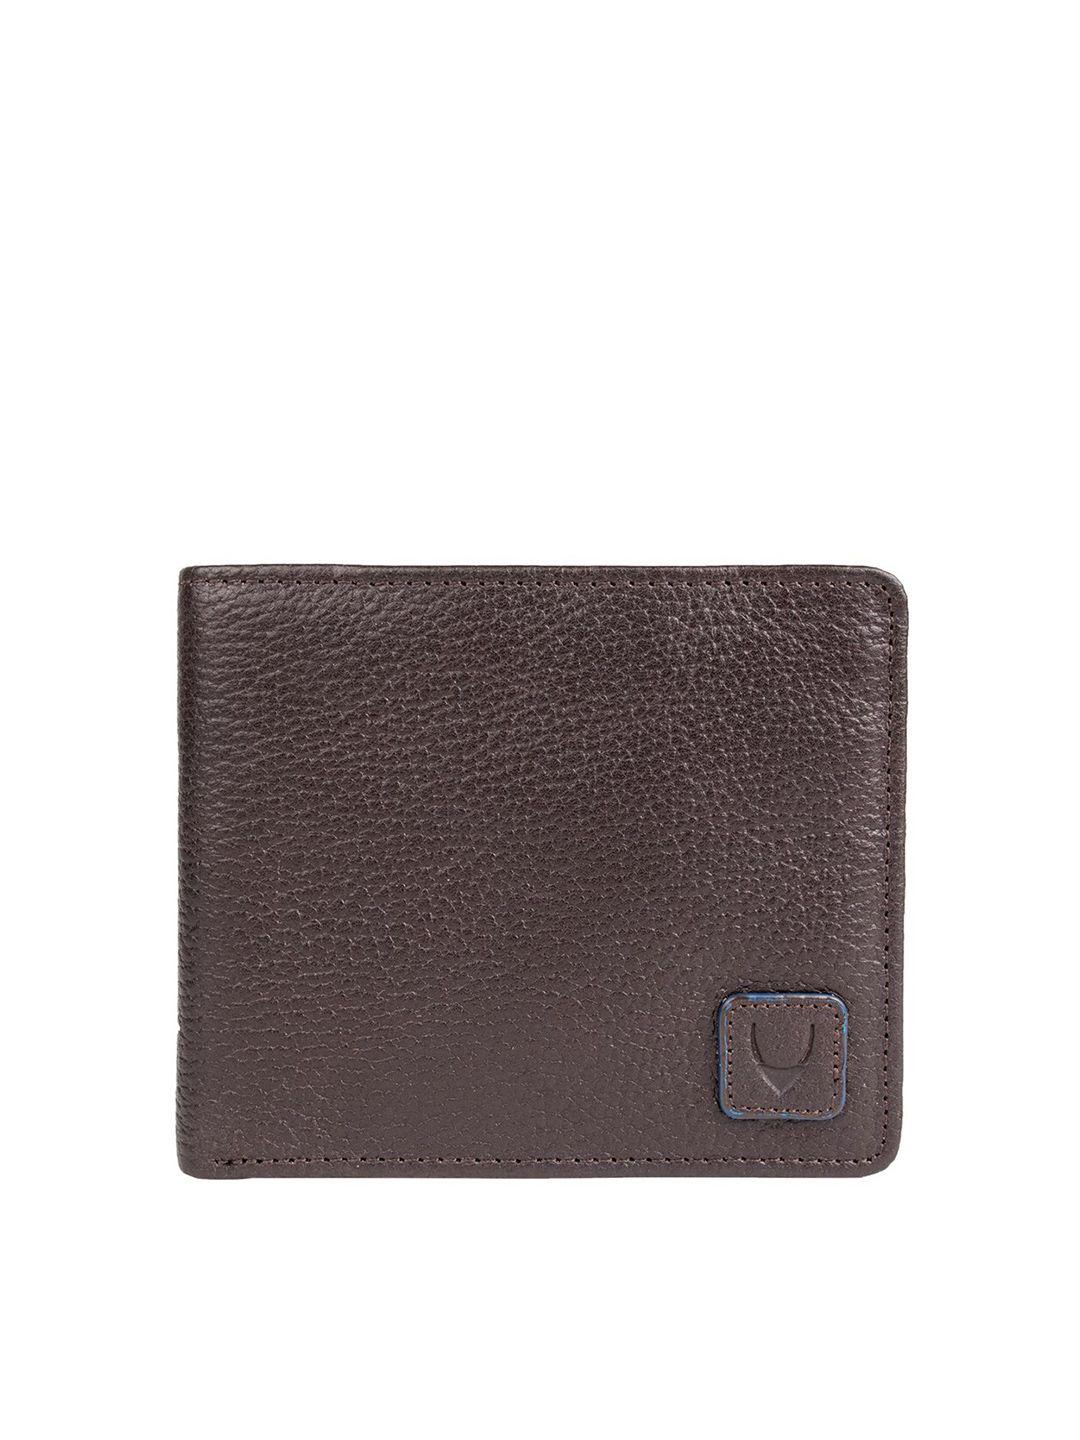 hidesign men brown textured leather two fold wallet